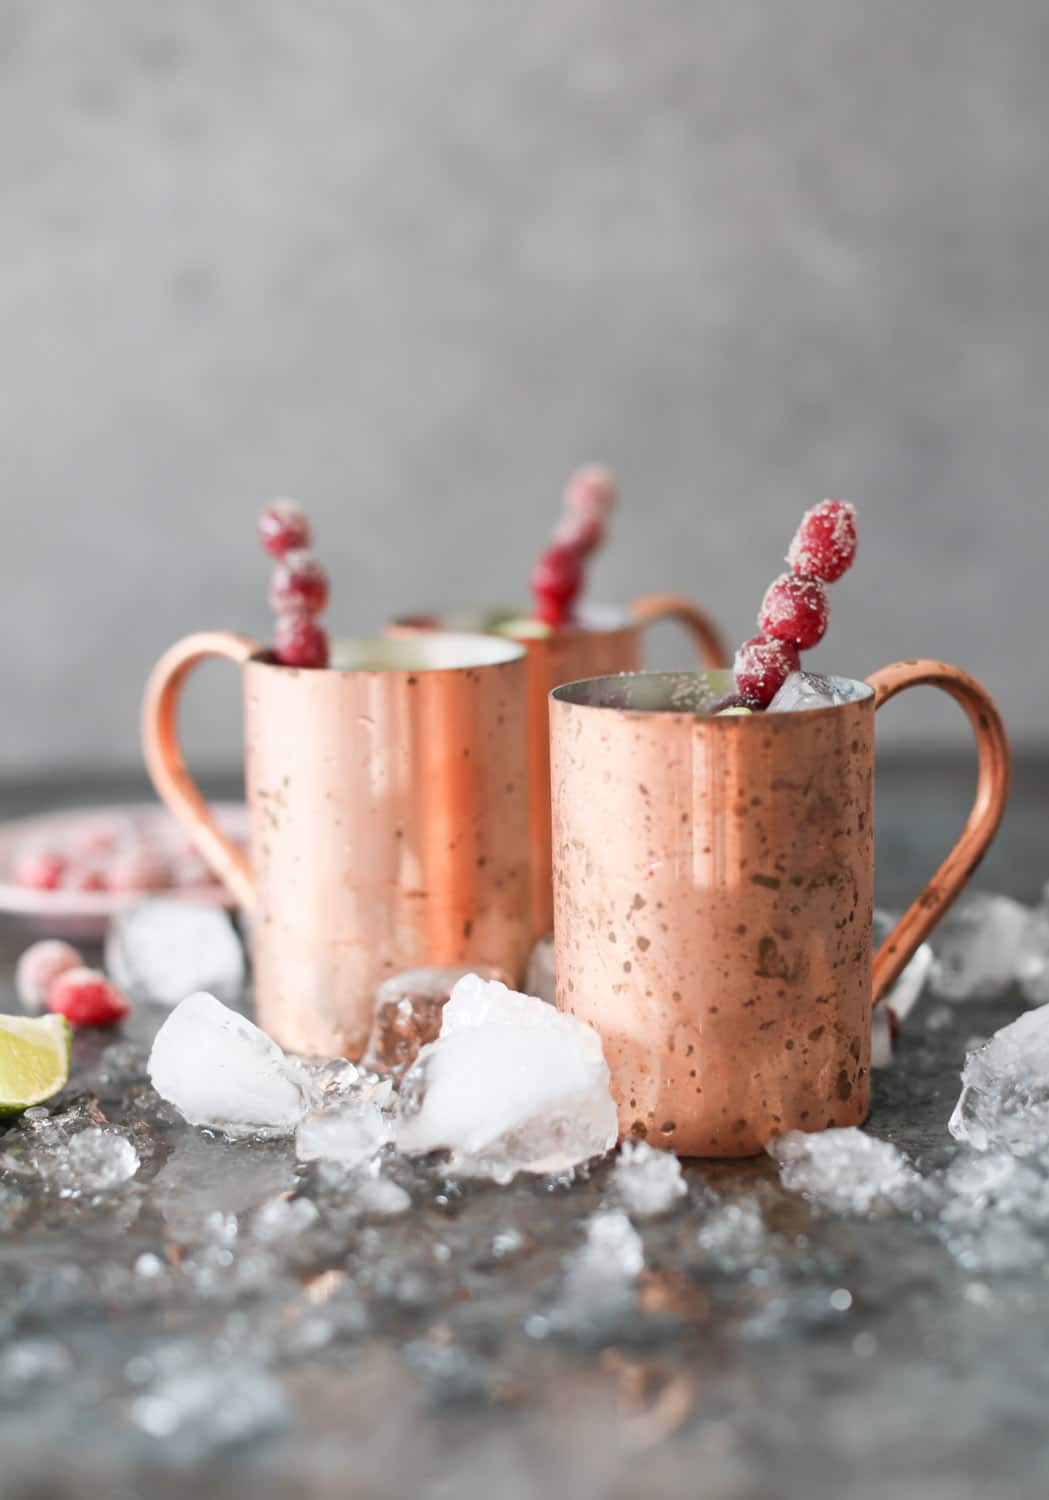 SIde view of Holiday Moscow Mules in copper mugs with sugared cranberry swizzle sticks.